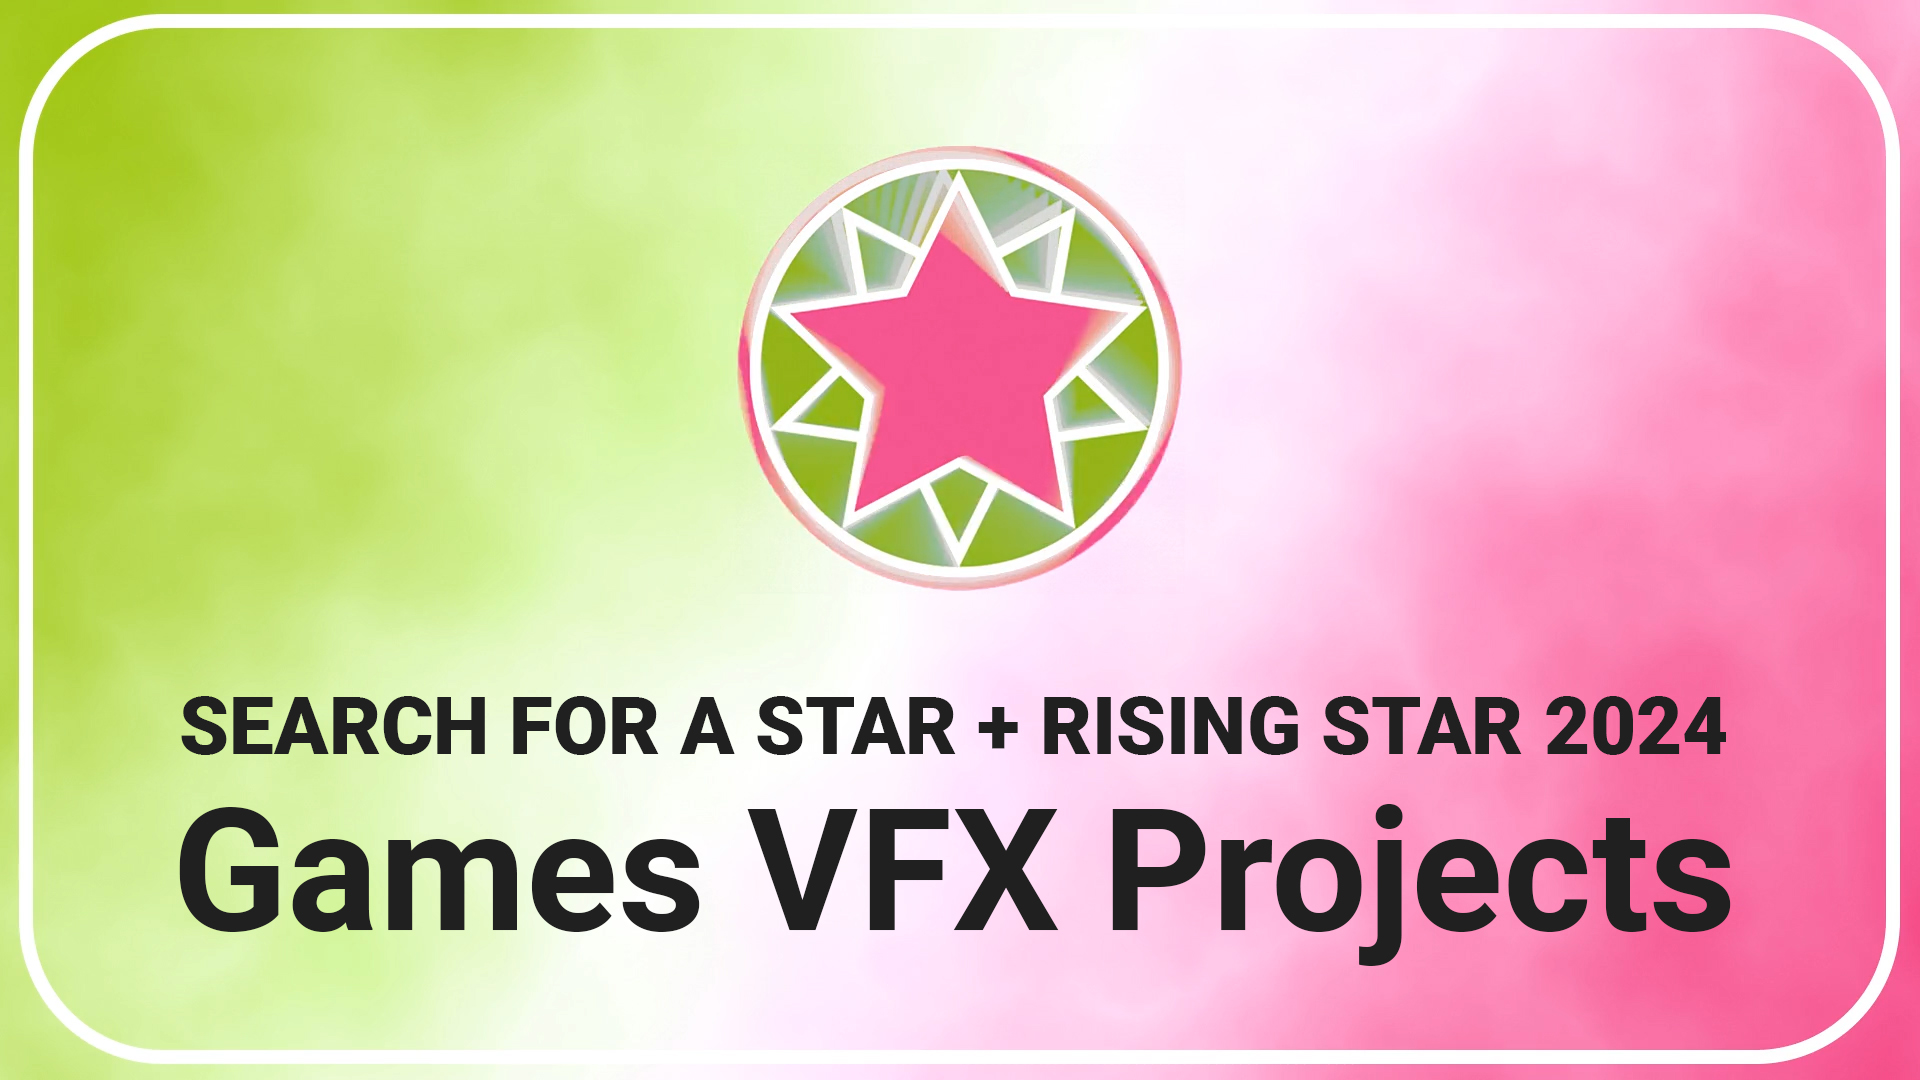 Games VFX Projects | Search For A Star 2024